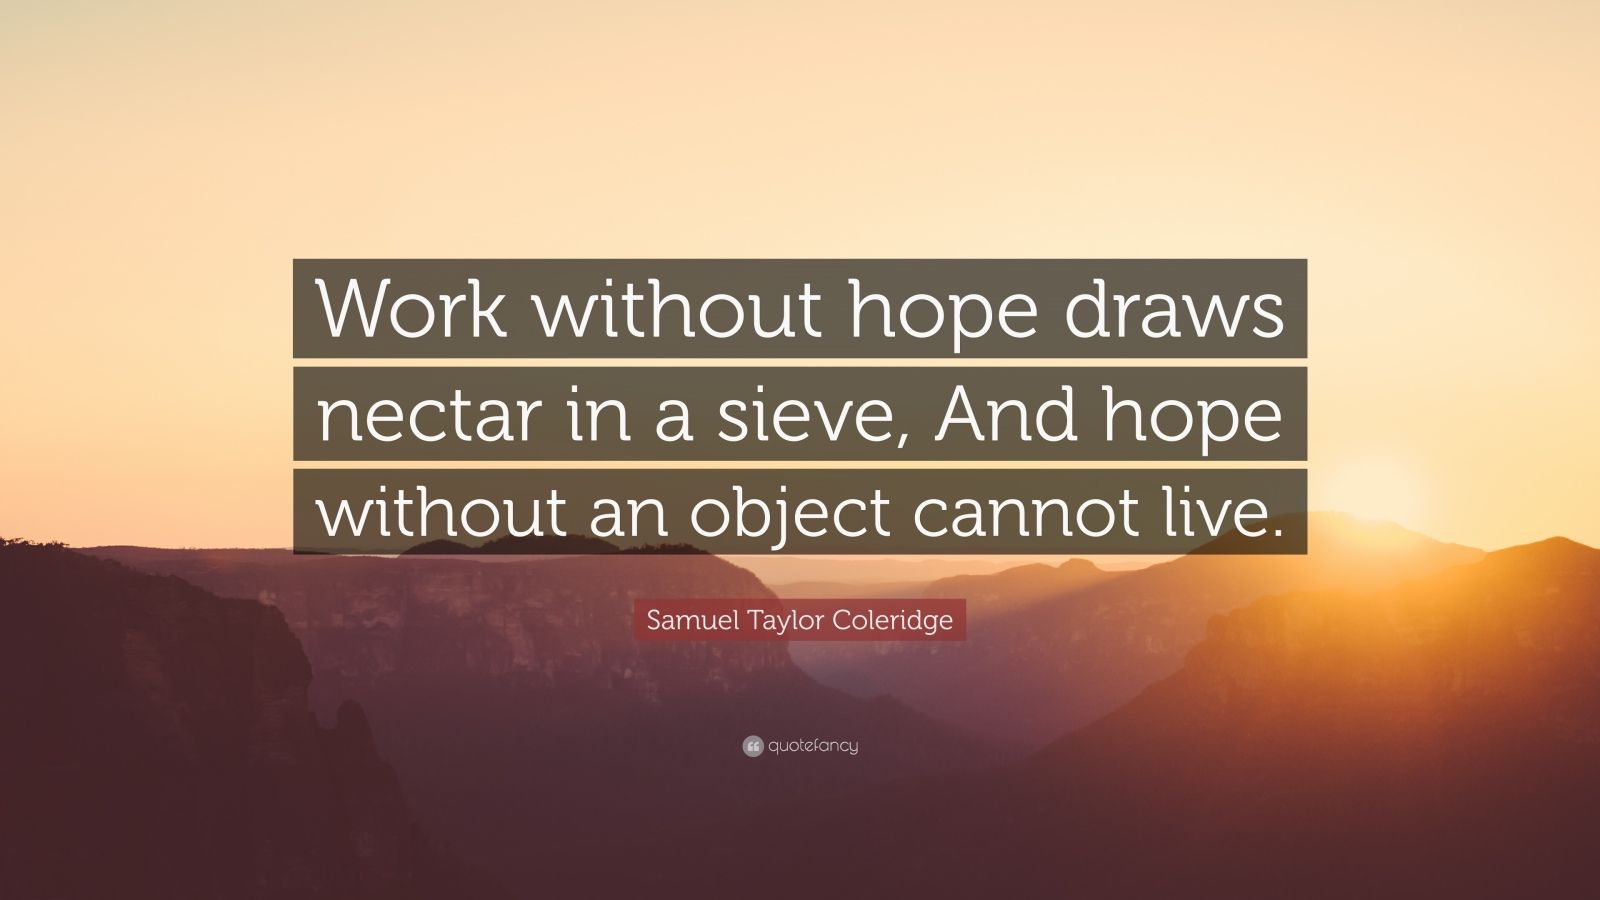 Samuel Taylor Coleridge Quote: “Work without hope draws nectar in a sieve, And hope ...1600 x 900